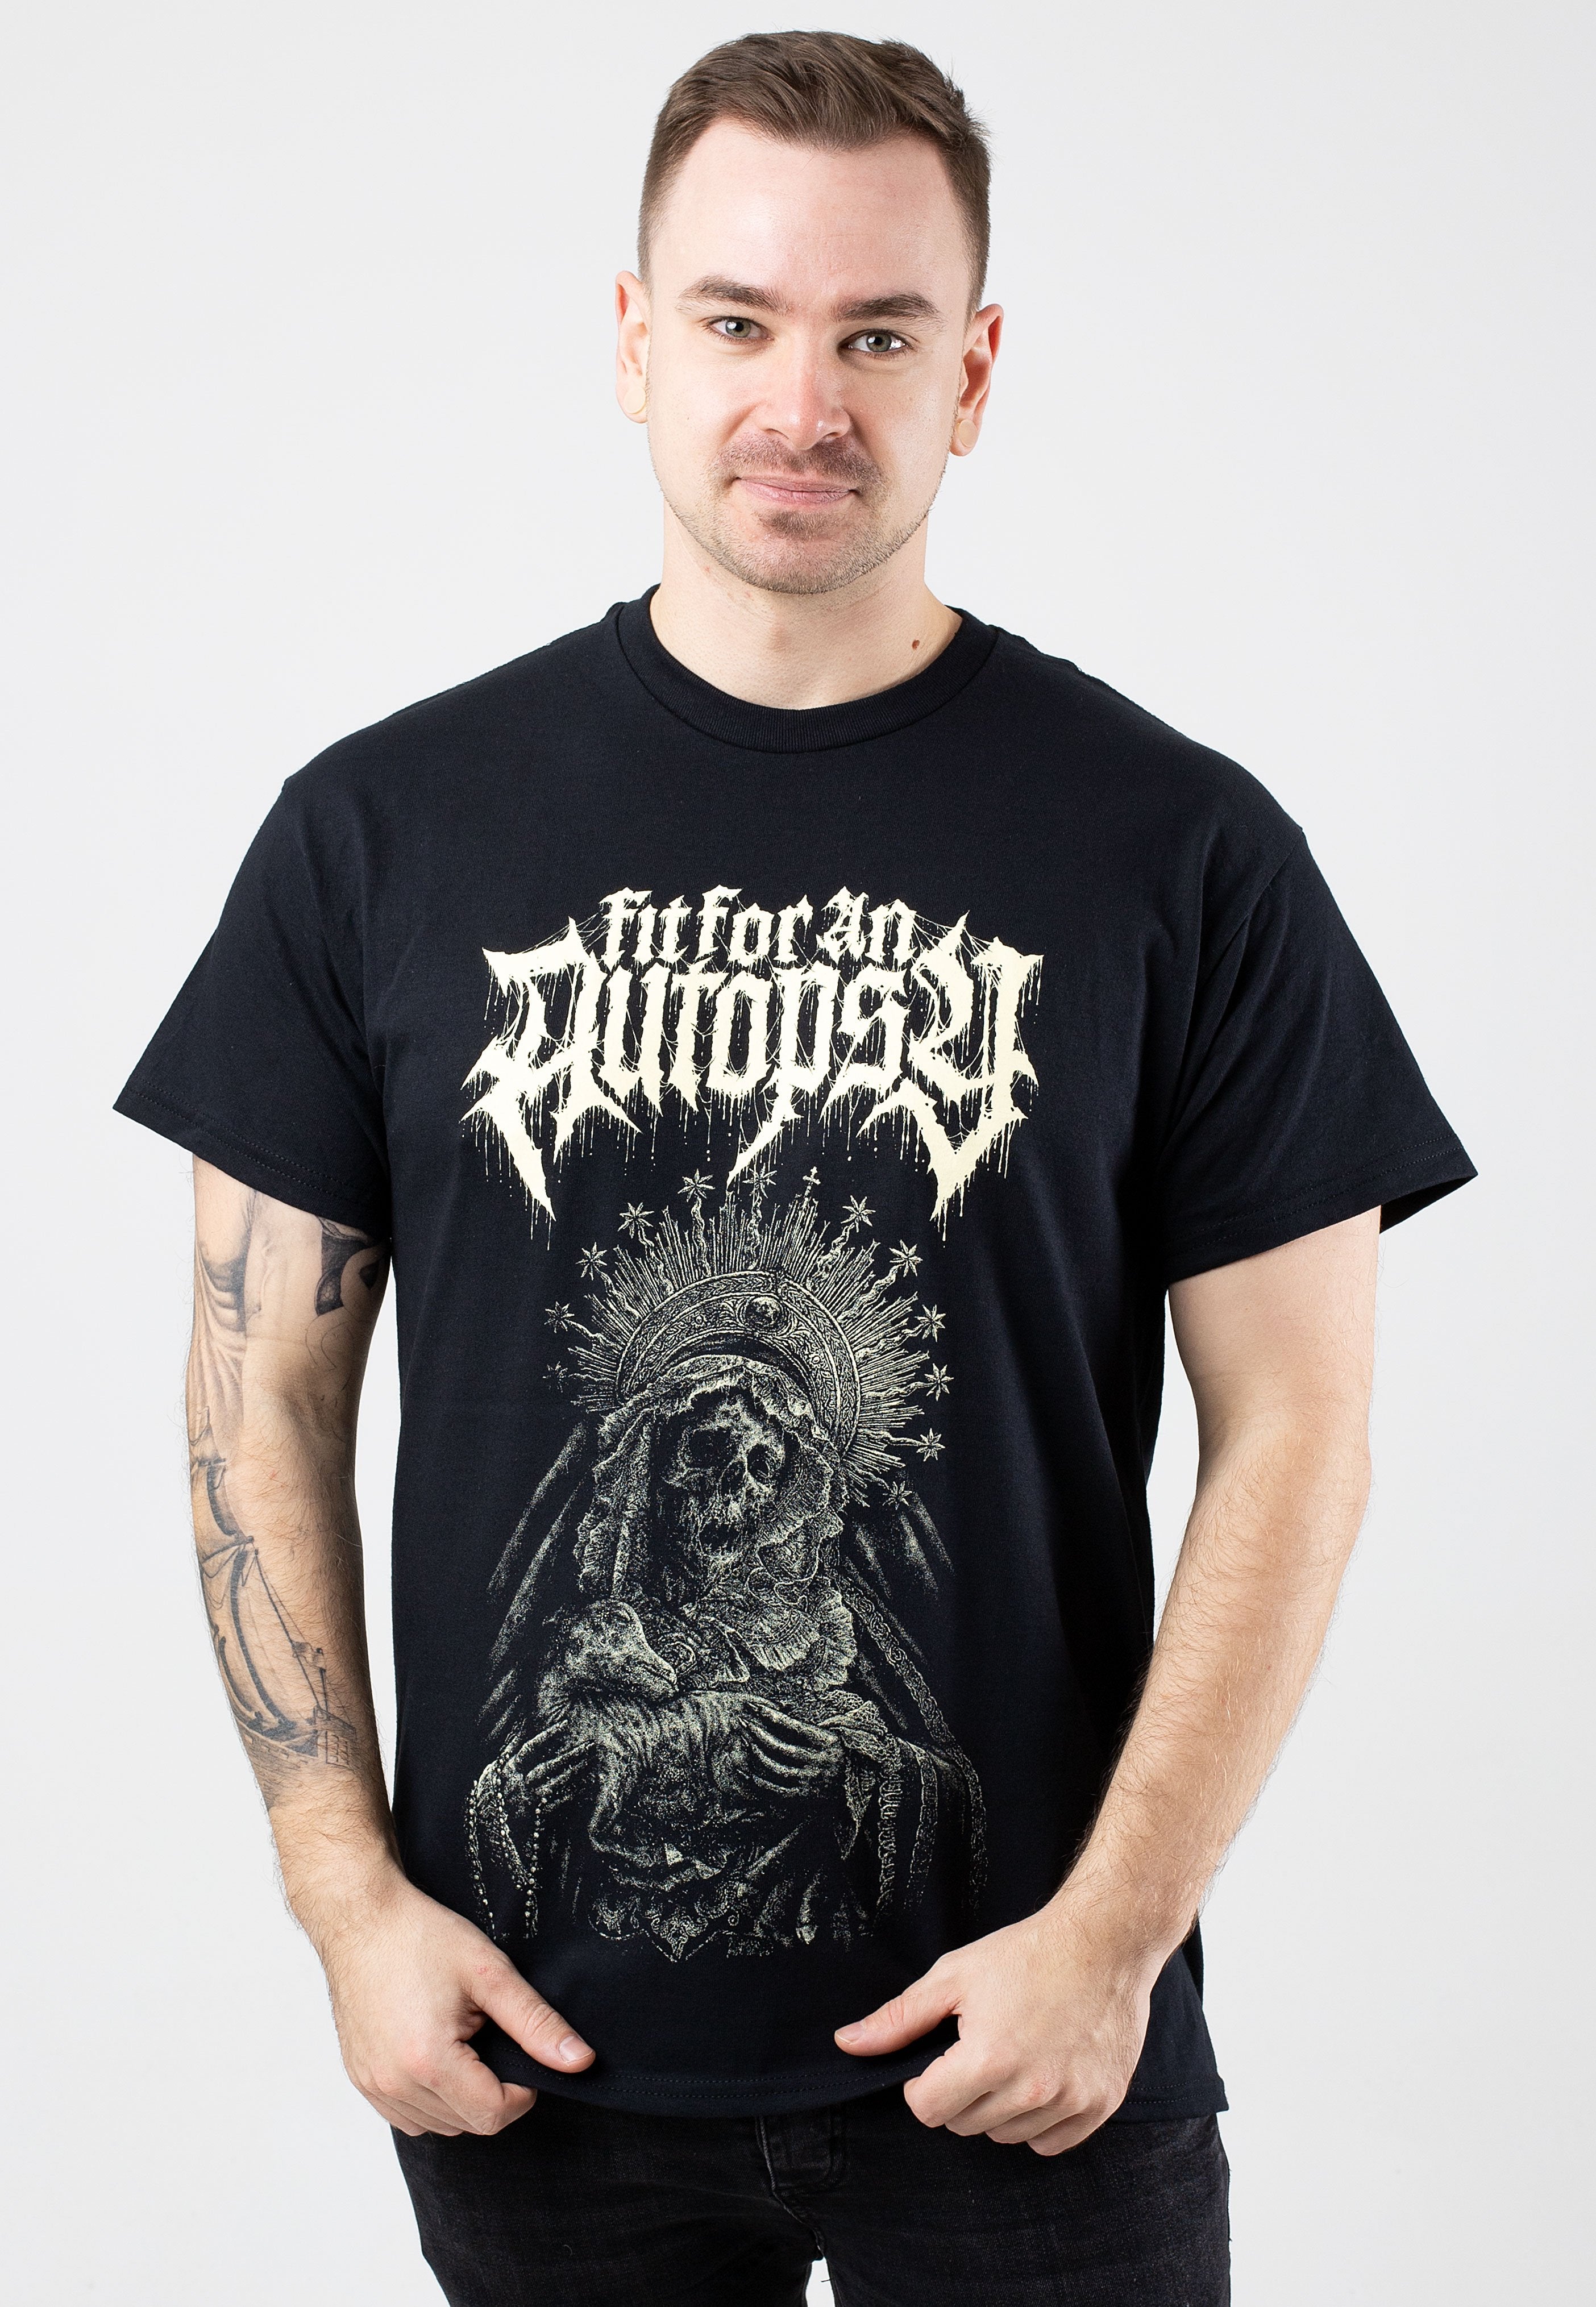 Fit For An Autopsy - Mary - T-Shirt